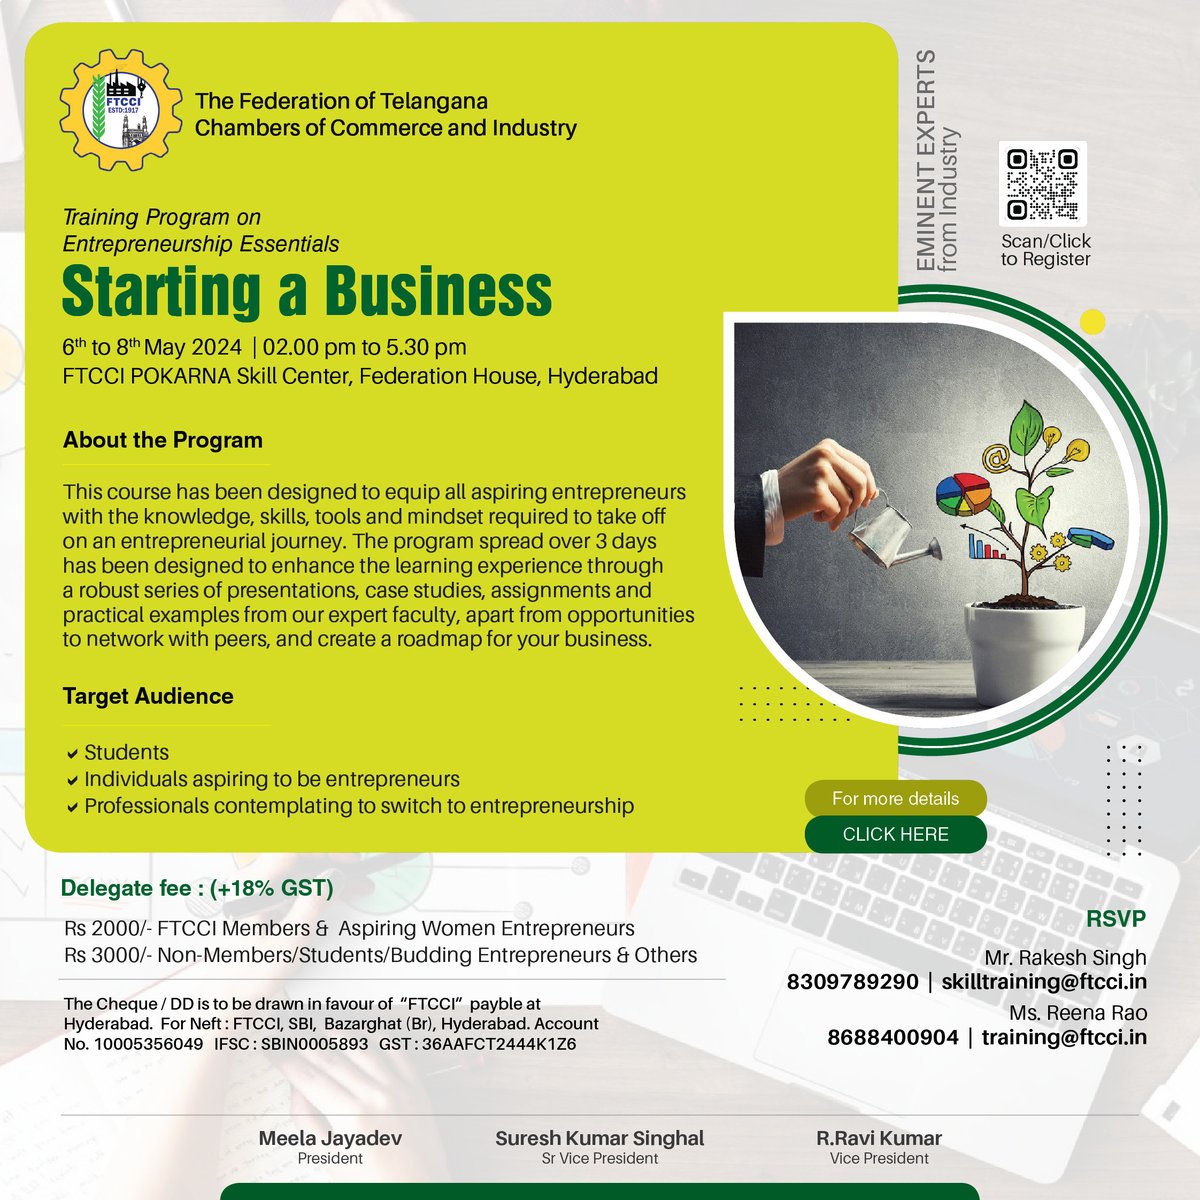 @FTCCI is organizing a Training Program on Entrepreneurship Essentials : Starting a Business
🗓️06th to 08th May, 2024
🕒02:00pm - 05:30pm
📍FTCCI Pokarna Skill Centre

📑For More Details: bit.ly/FTCCITrainingP…

#FTCCI #EntrepreneurshipTraining #StartingABusiness #FTCCIProgram